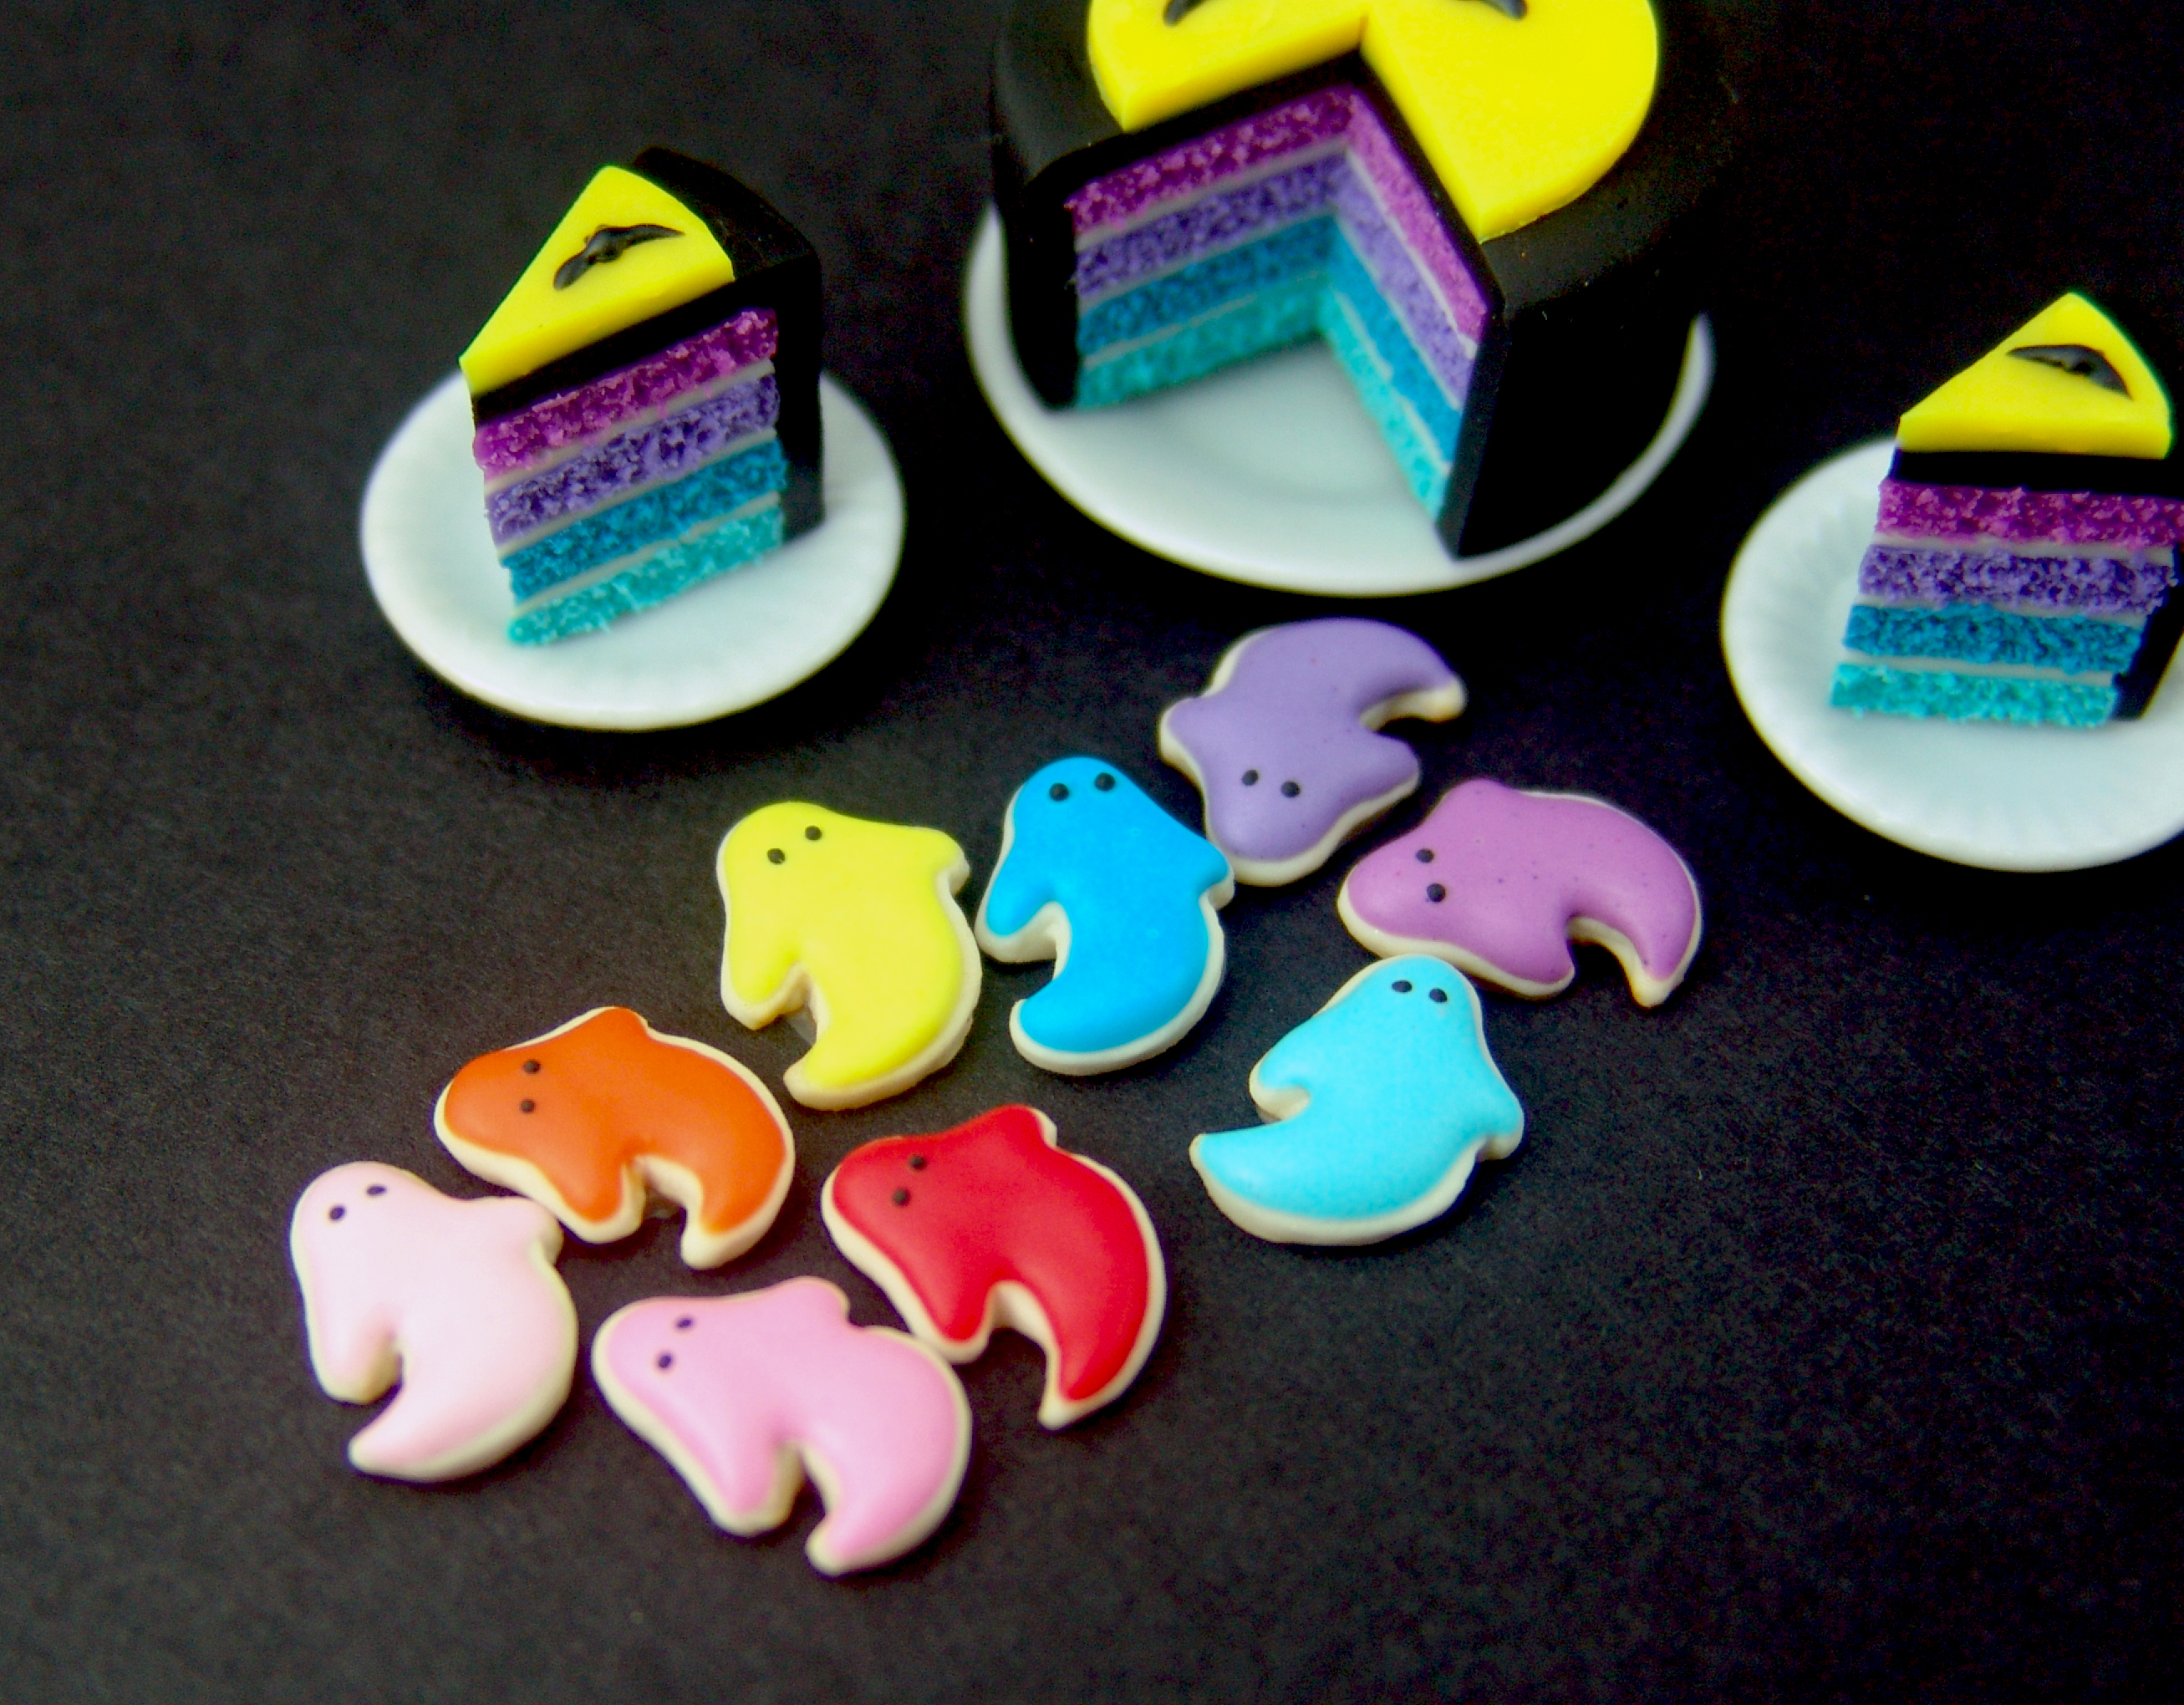 Polymer clay cookies by The Mouse Market